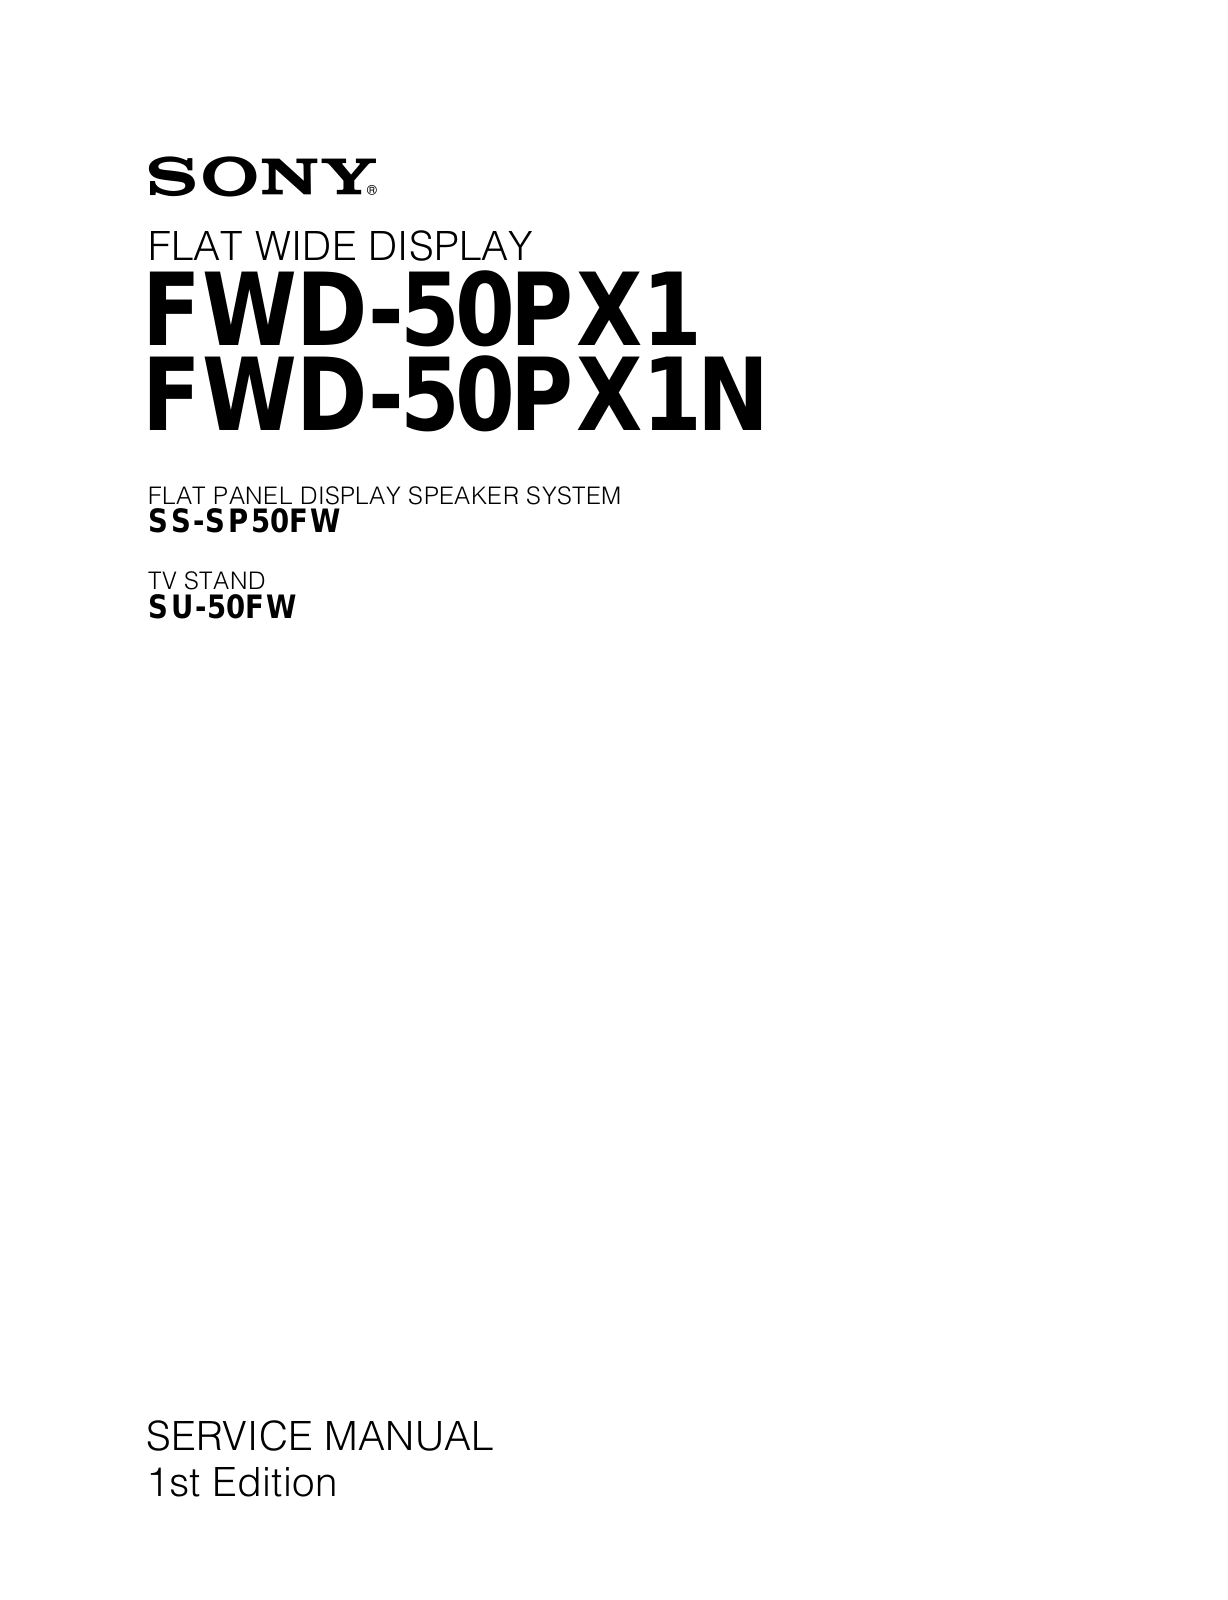 Sony FWD-50PX1N Schematic